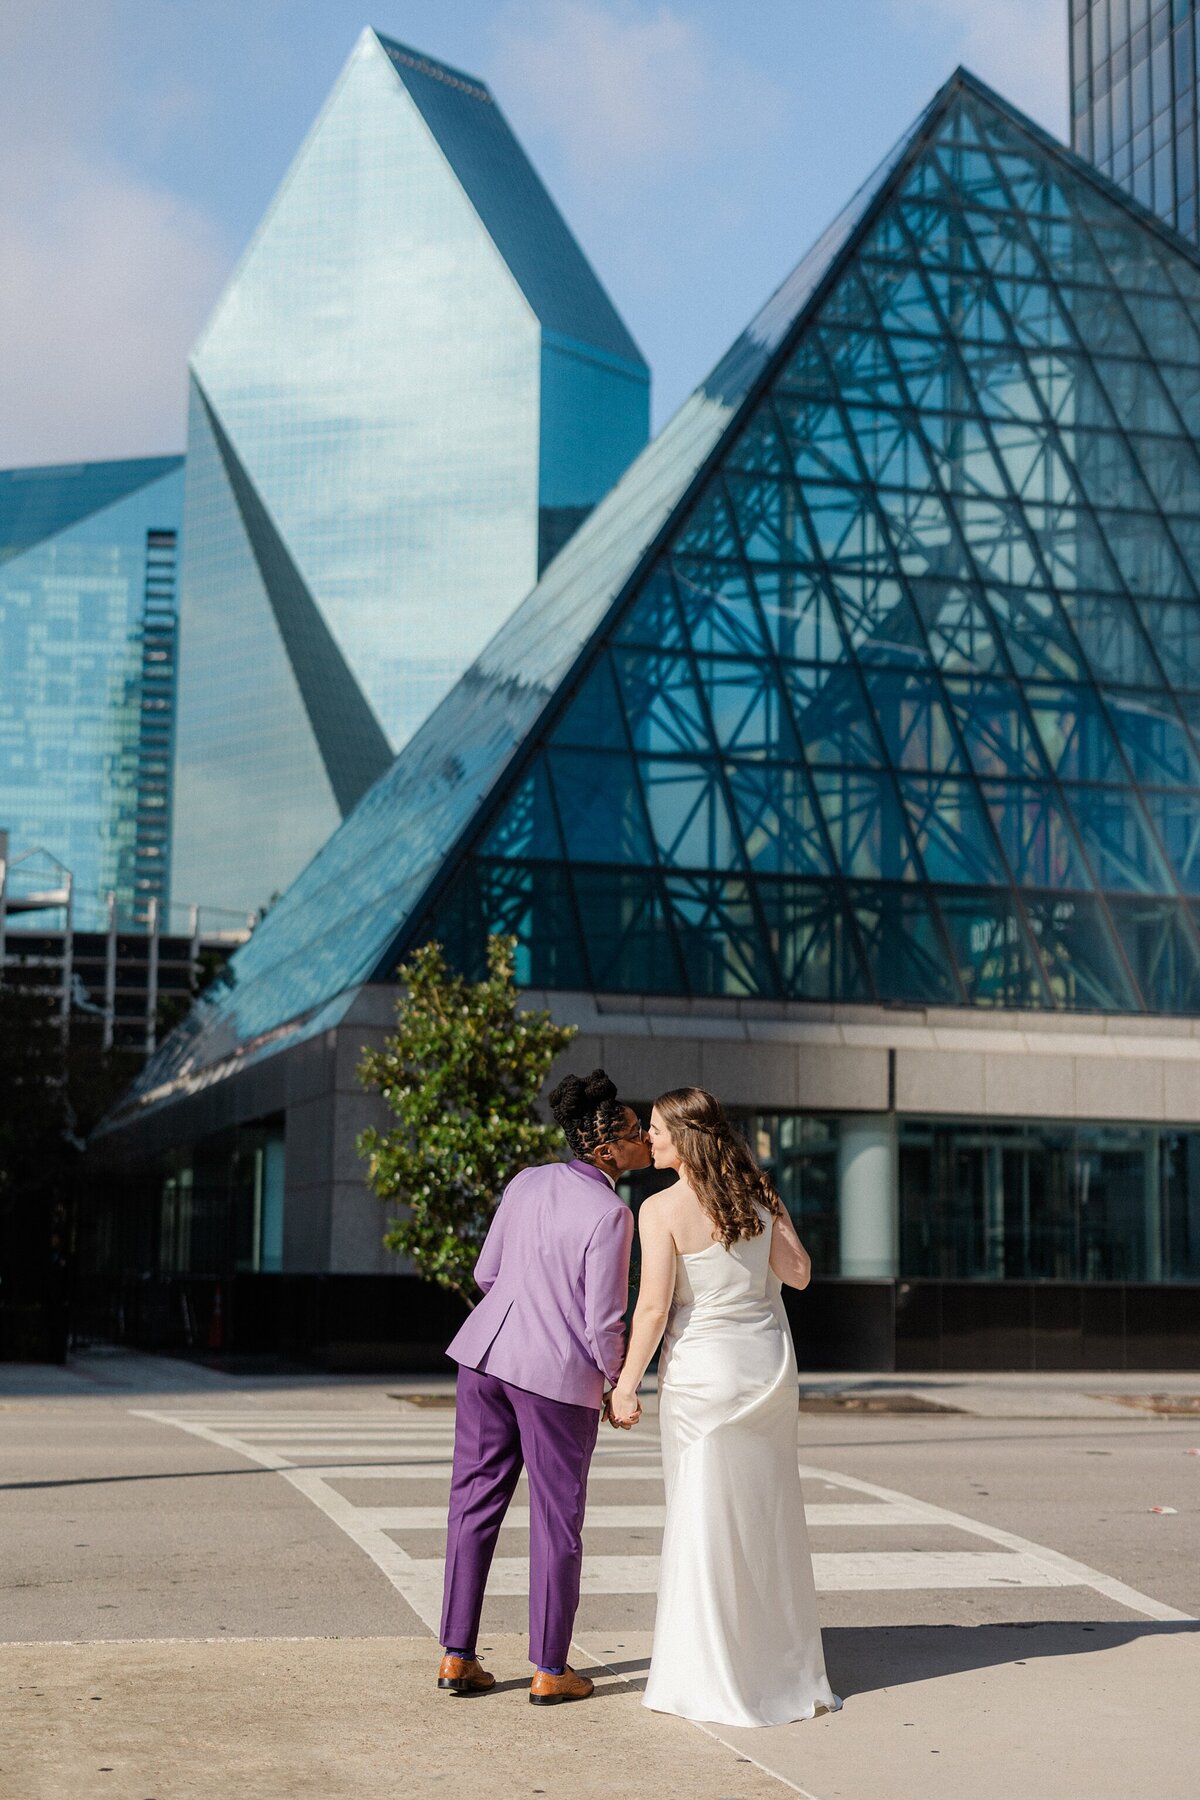 Two brides share a kiss outside of The Westin Dallas Downtown in Dallas, Texas. The bride on the right is wearing a sleeveless, elegant, white dress. The bride on the left is wearing a purple suit with dress shoes. The Dallas skyline can be seen in the background.